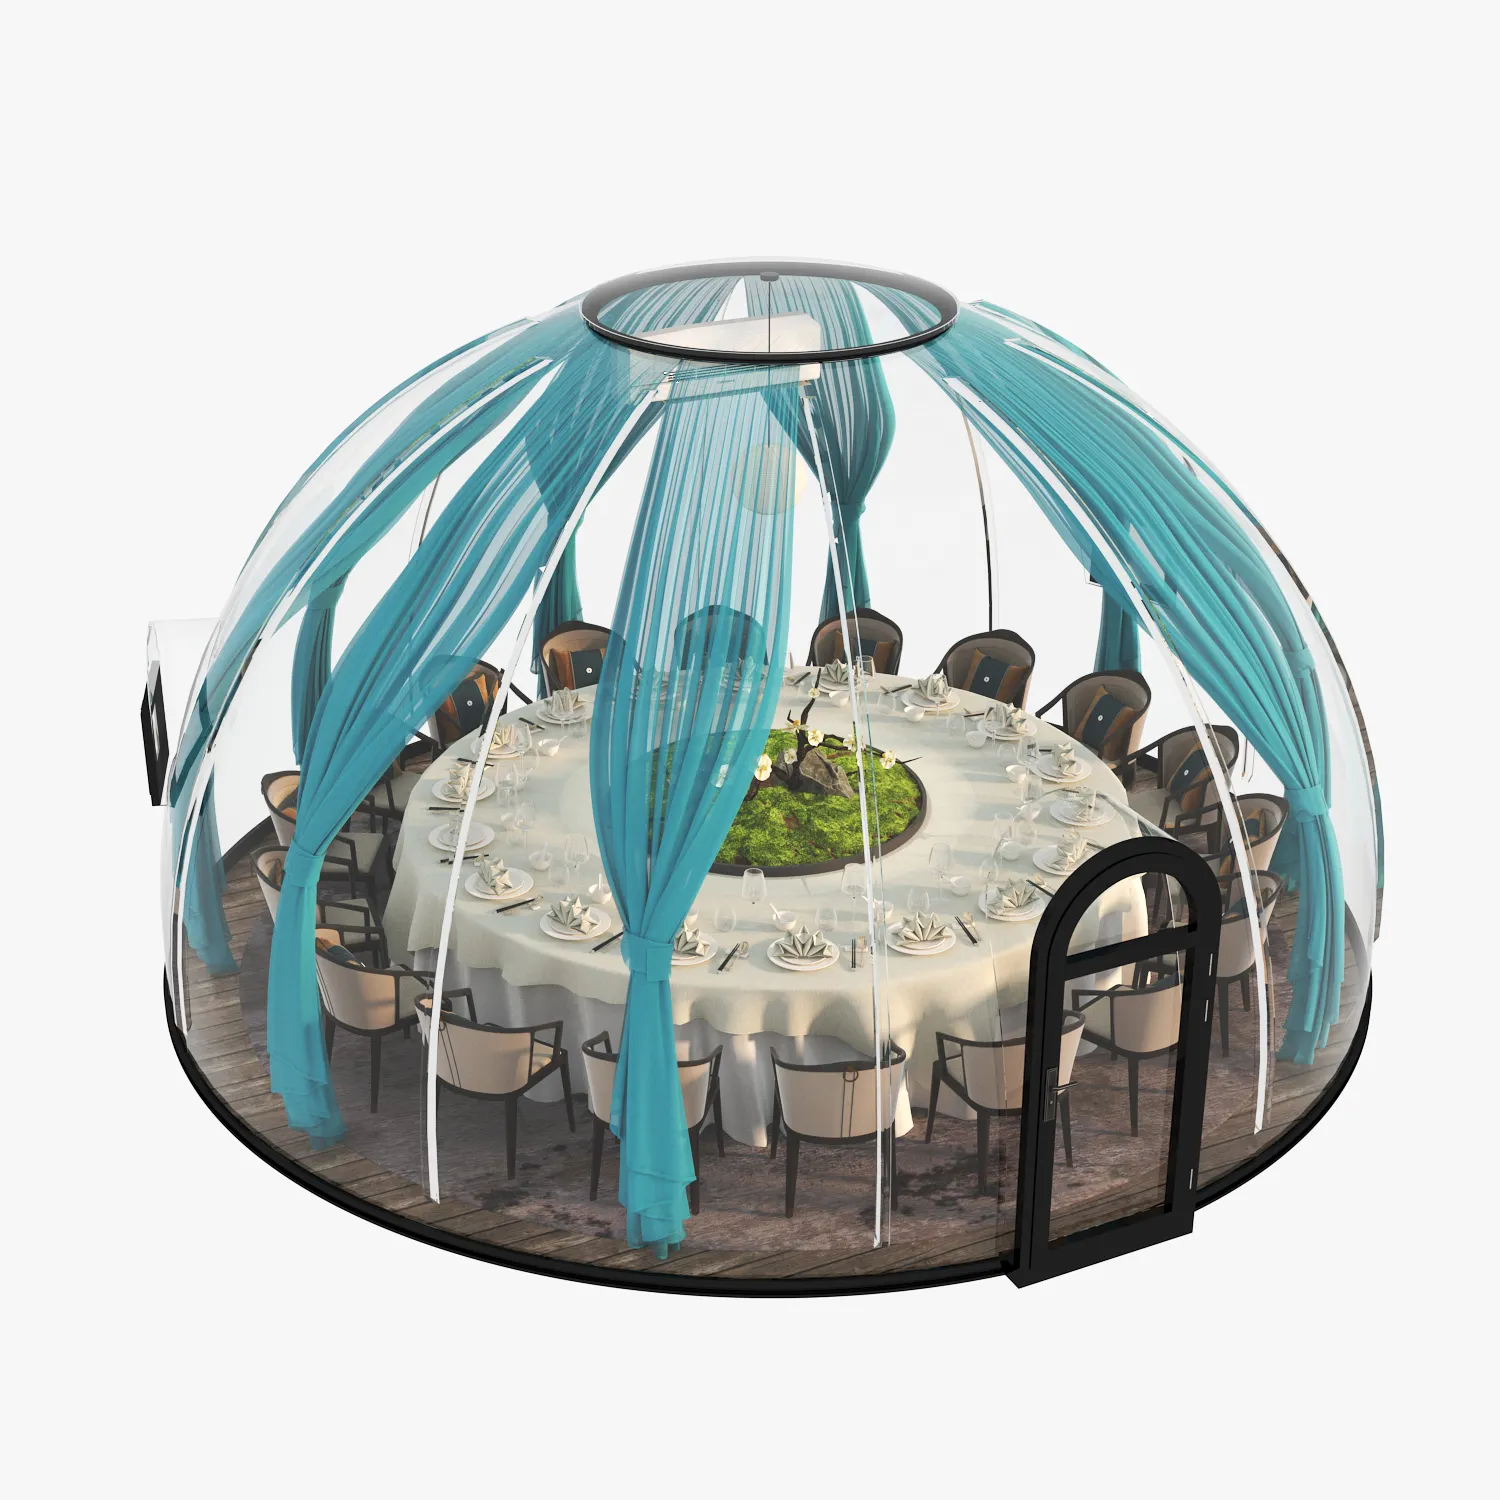 4m hot sale luxury transparent outdoor garden dome igloo home tent